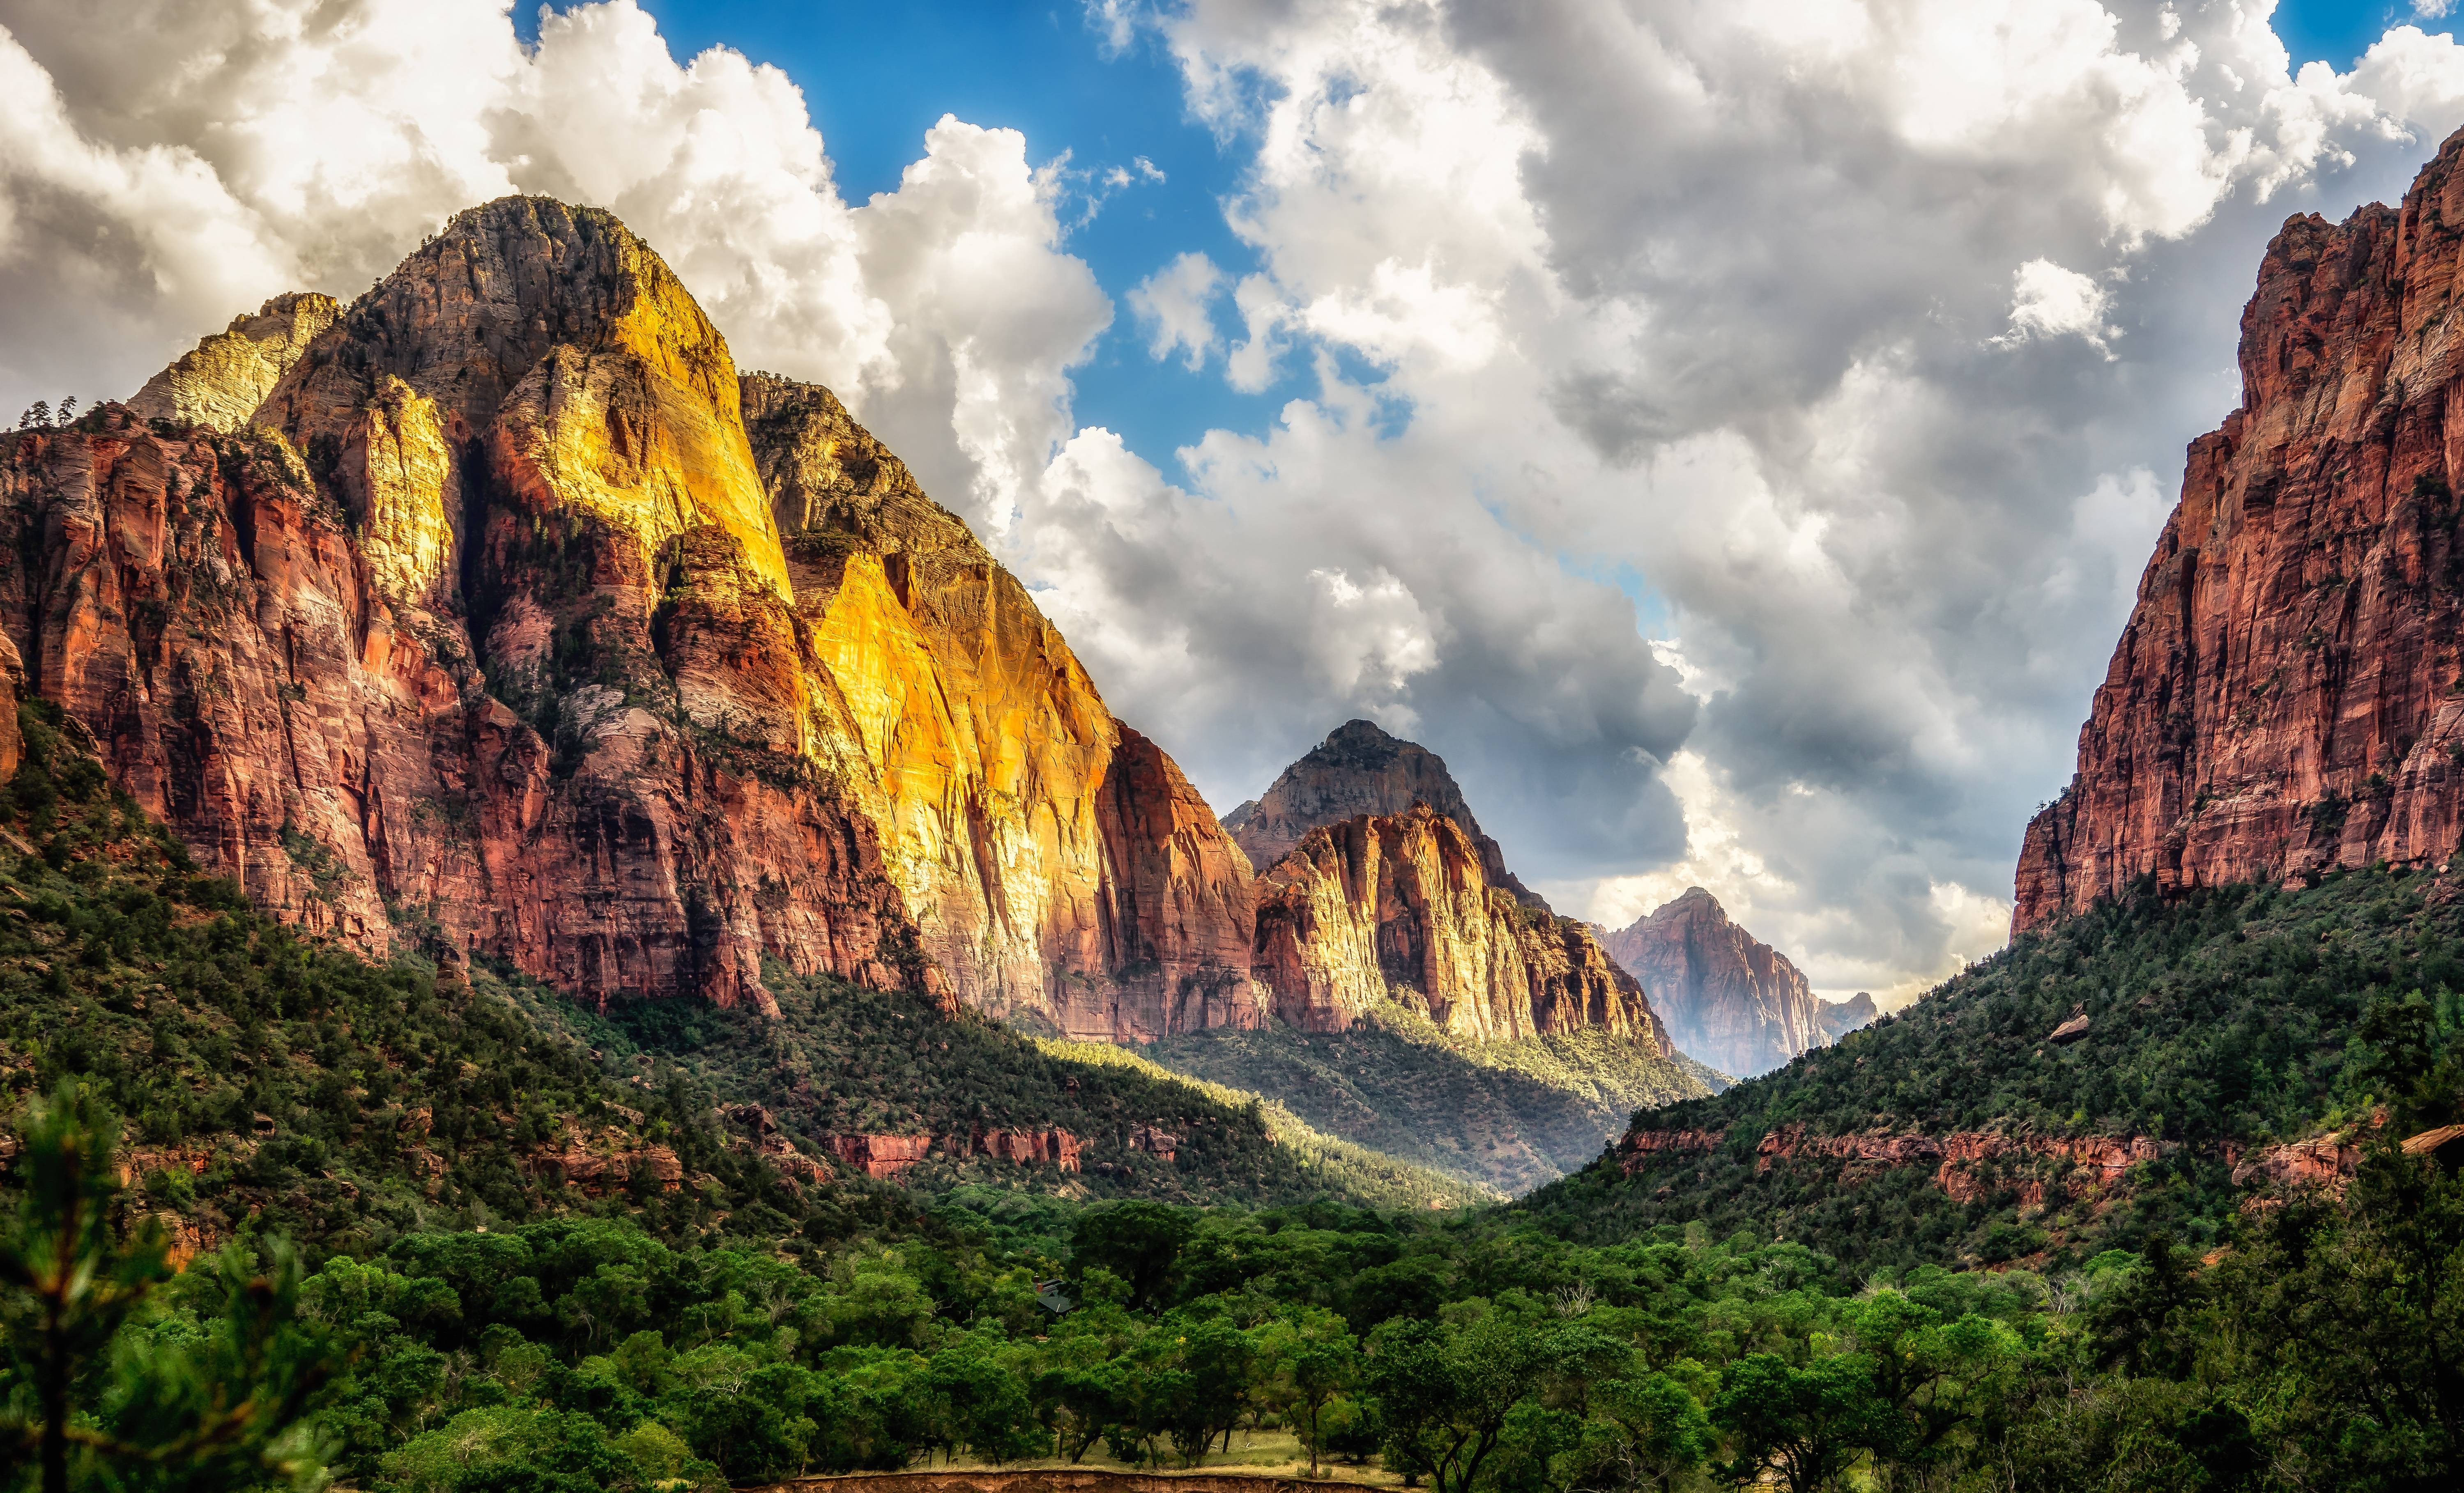 Zion National Park Utah Trees Clouds Nature 5999x3636